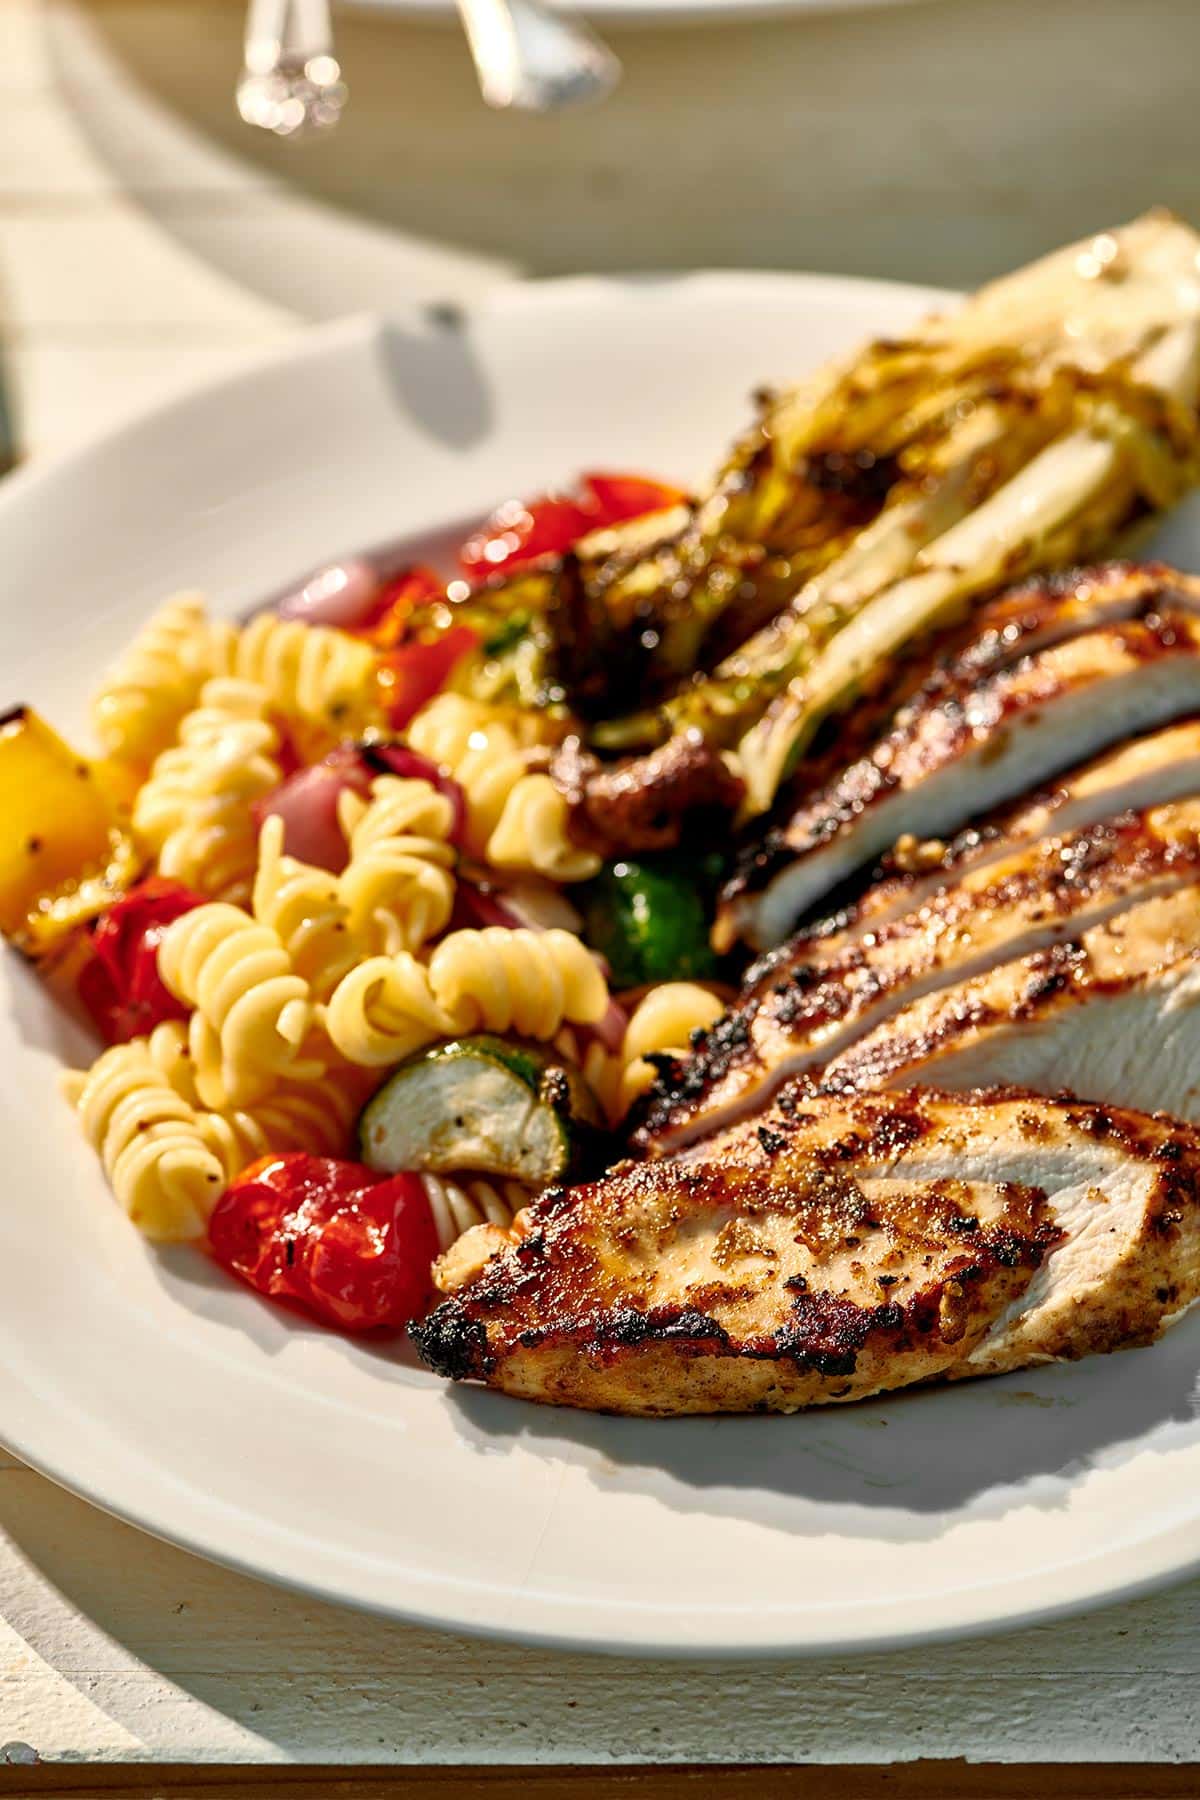 White plate at barbecue with grilled chicken and grilled veggies mixed into pasta salad.